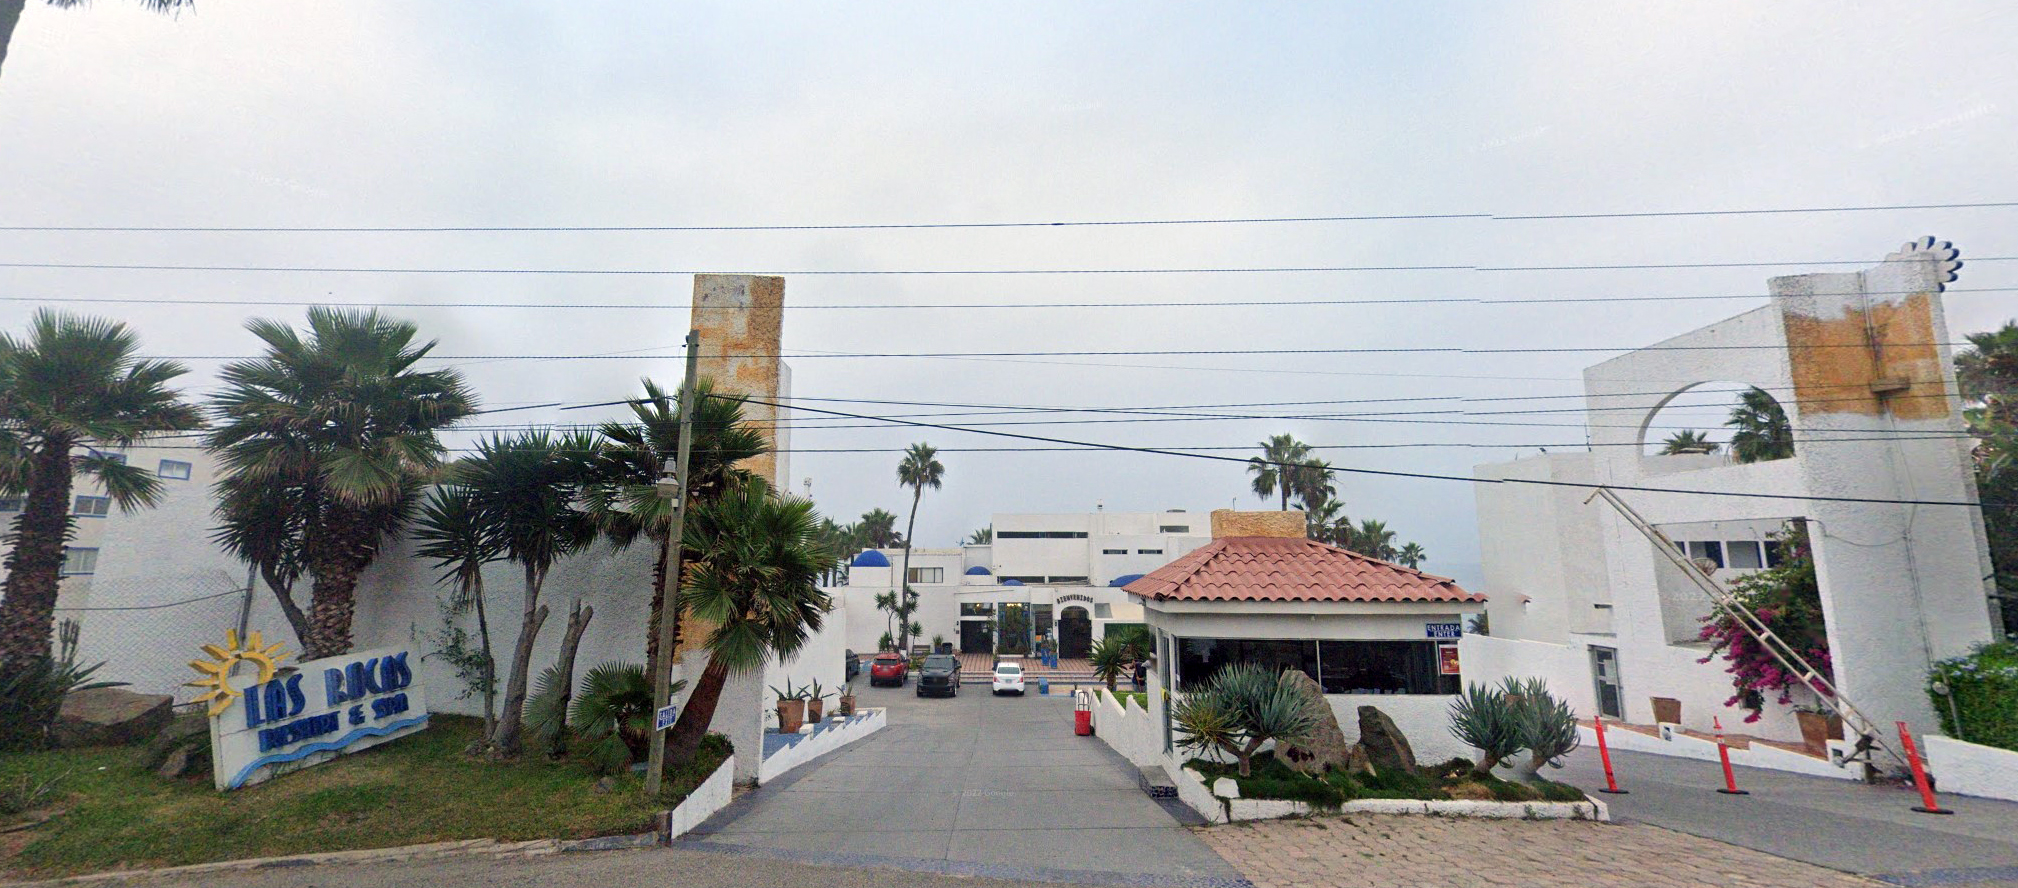 PHOTO: Las Rocas Resort and Spa in Rosarito Beach, Mexico, in an image from Google Street View 2022.